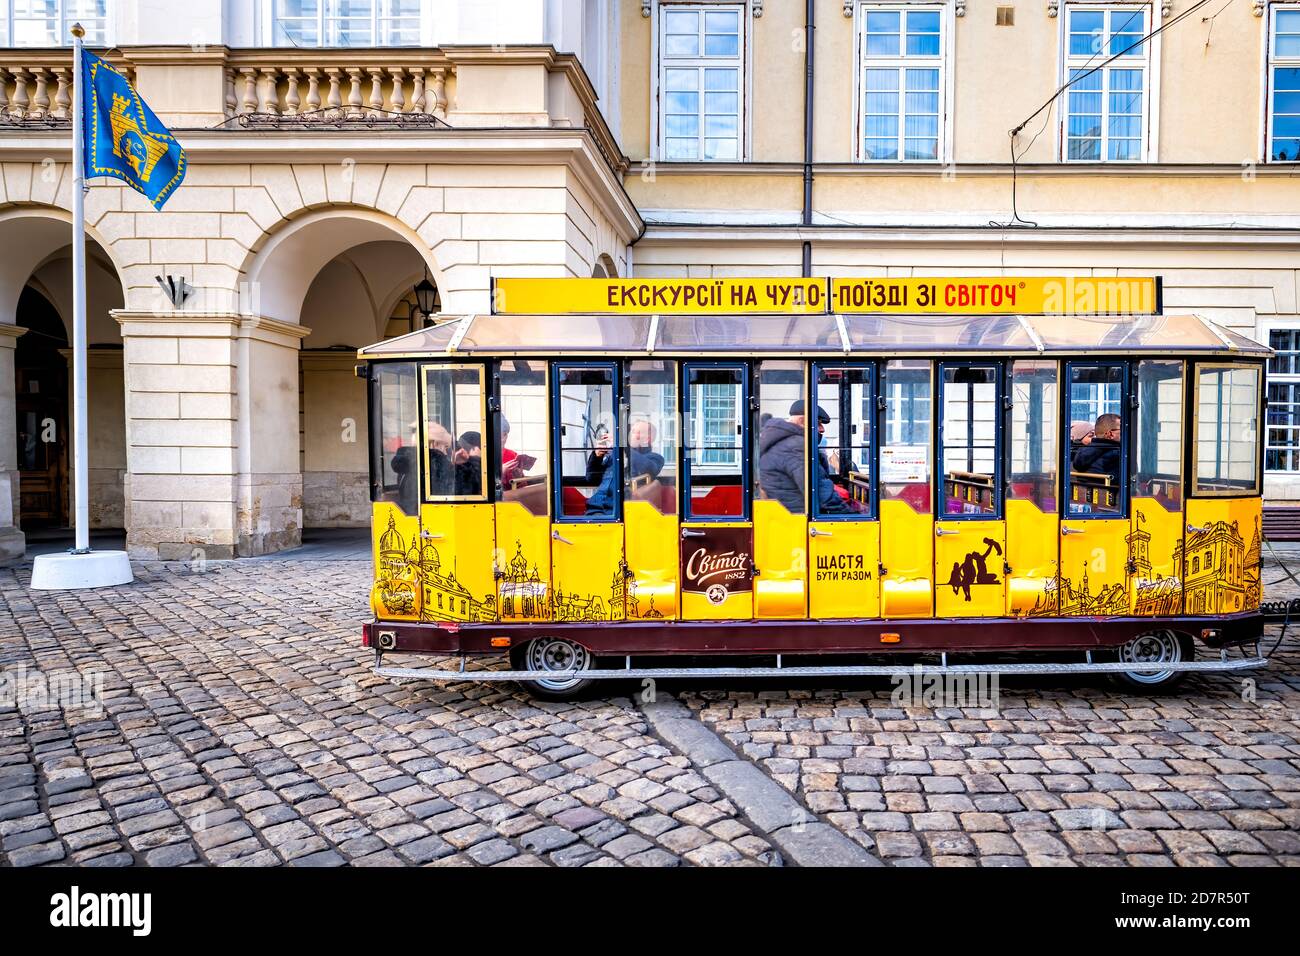 Lviv, Ukraine - January 21, 2020: Ukrainian Lvov city in old town with people sitting inside car of Svitoch sponsored guided tram tramway car tour at Stock Photo